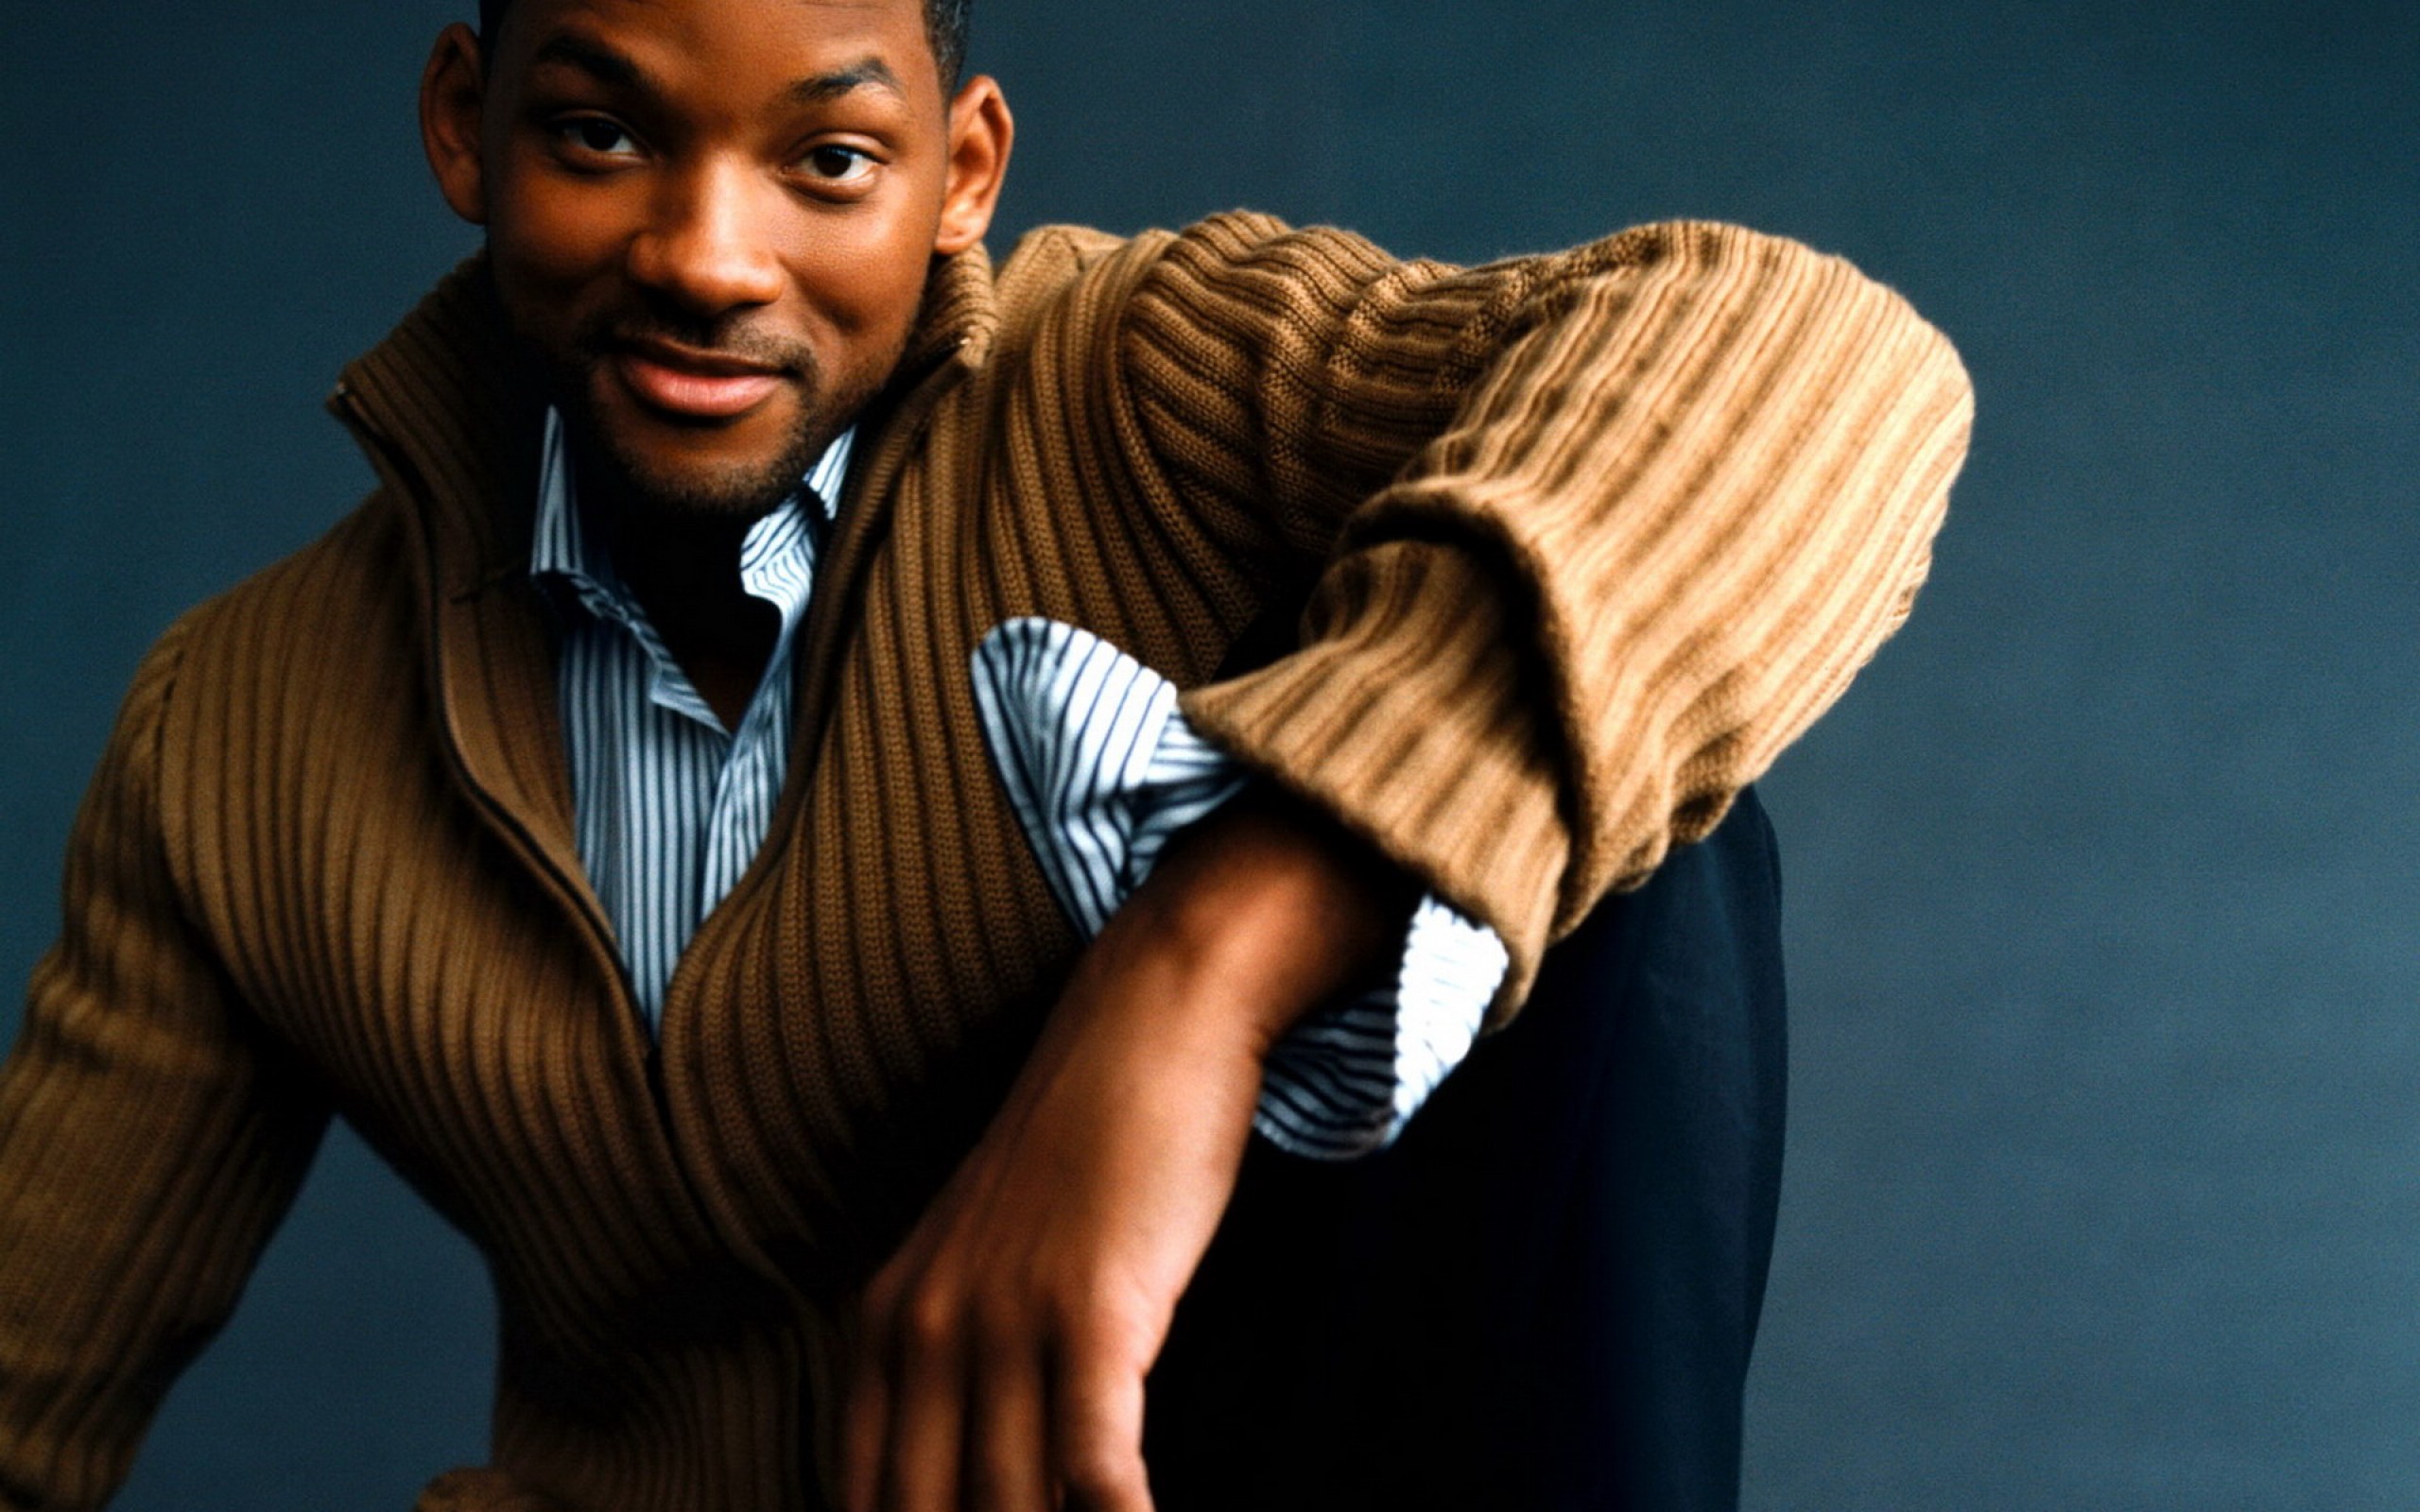 will smith wallpaper,tie,muscle,photography,smile